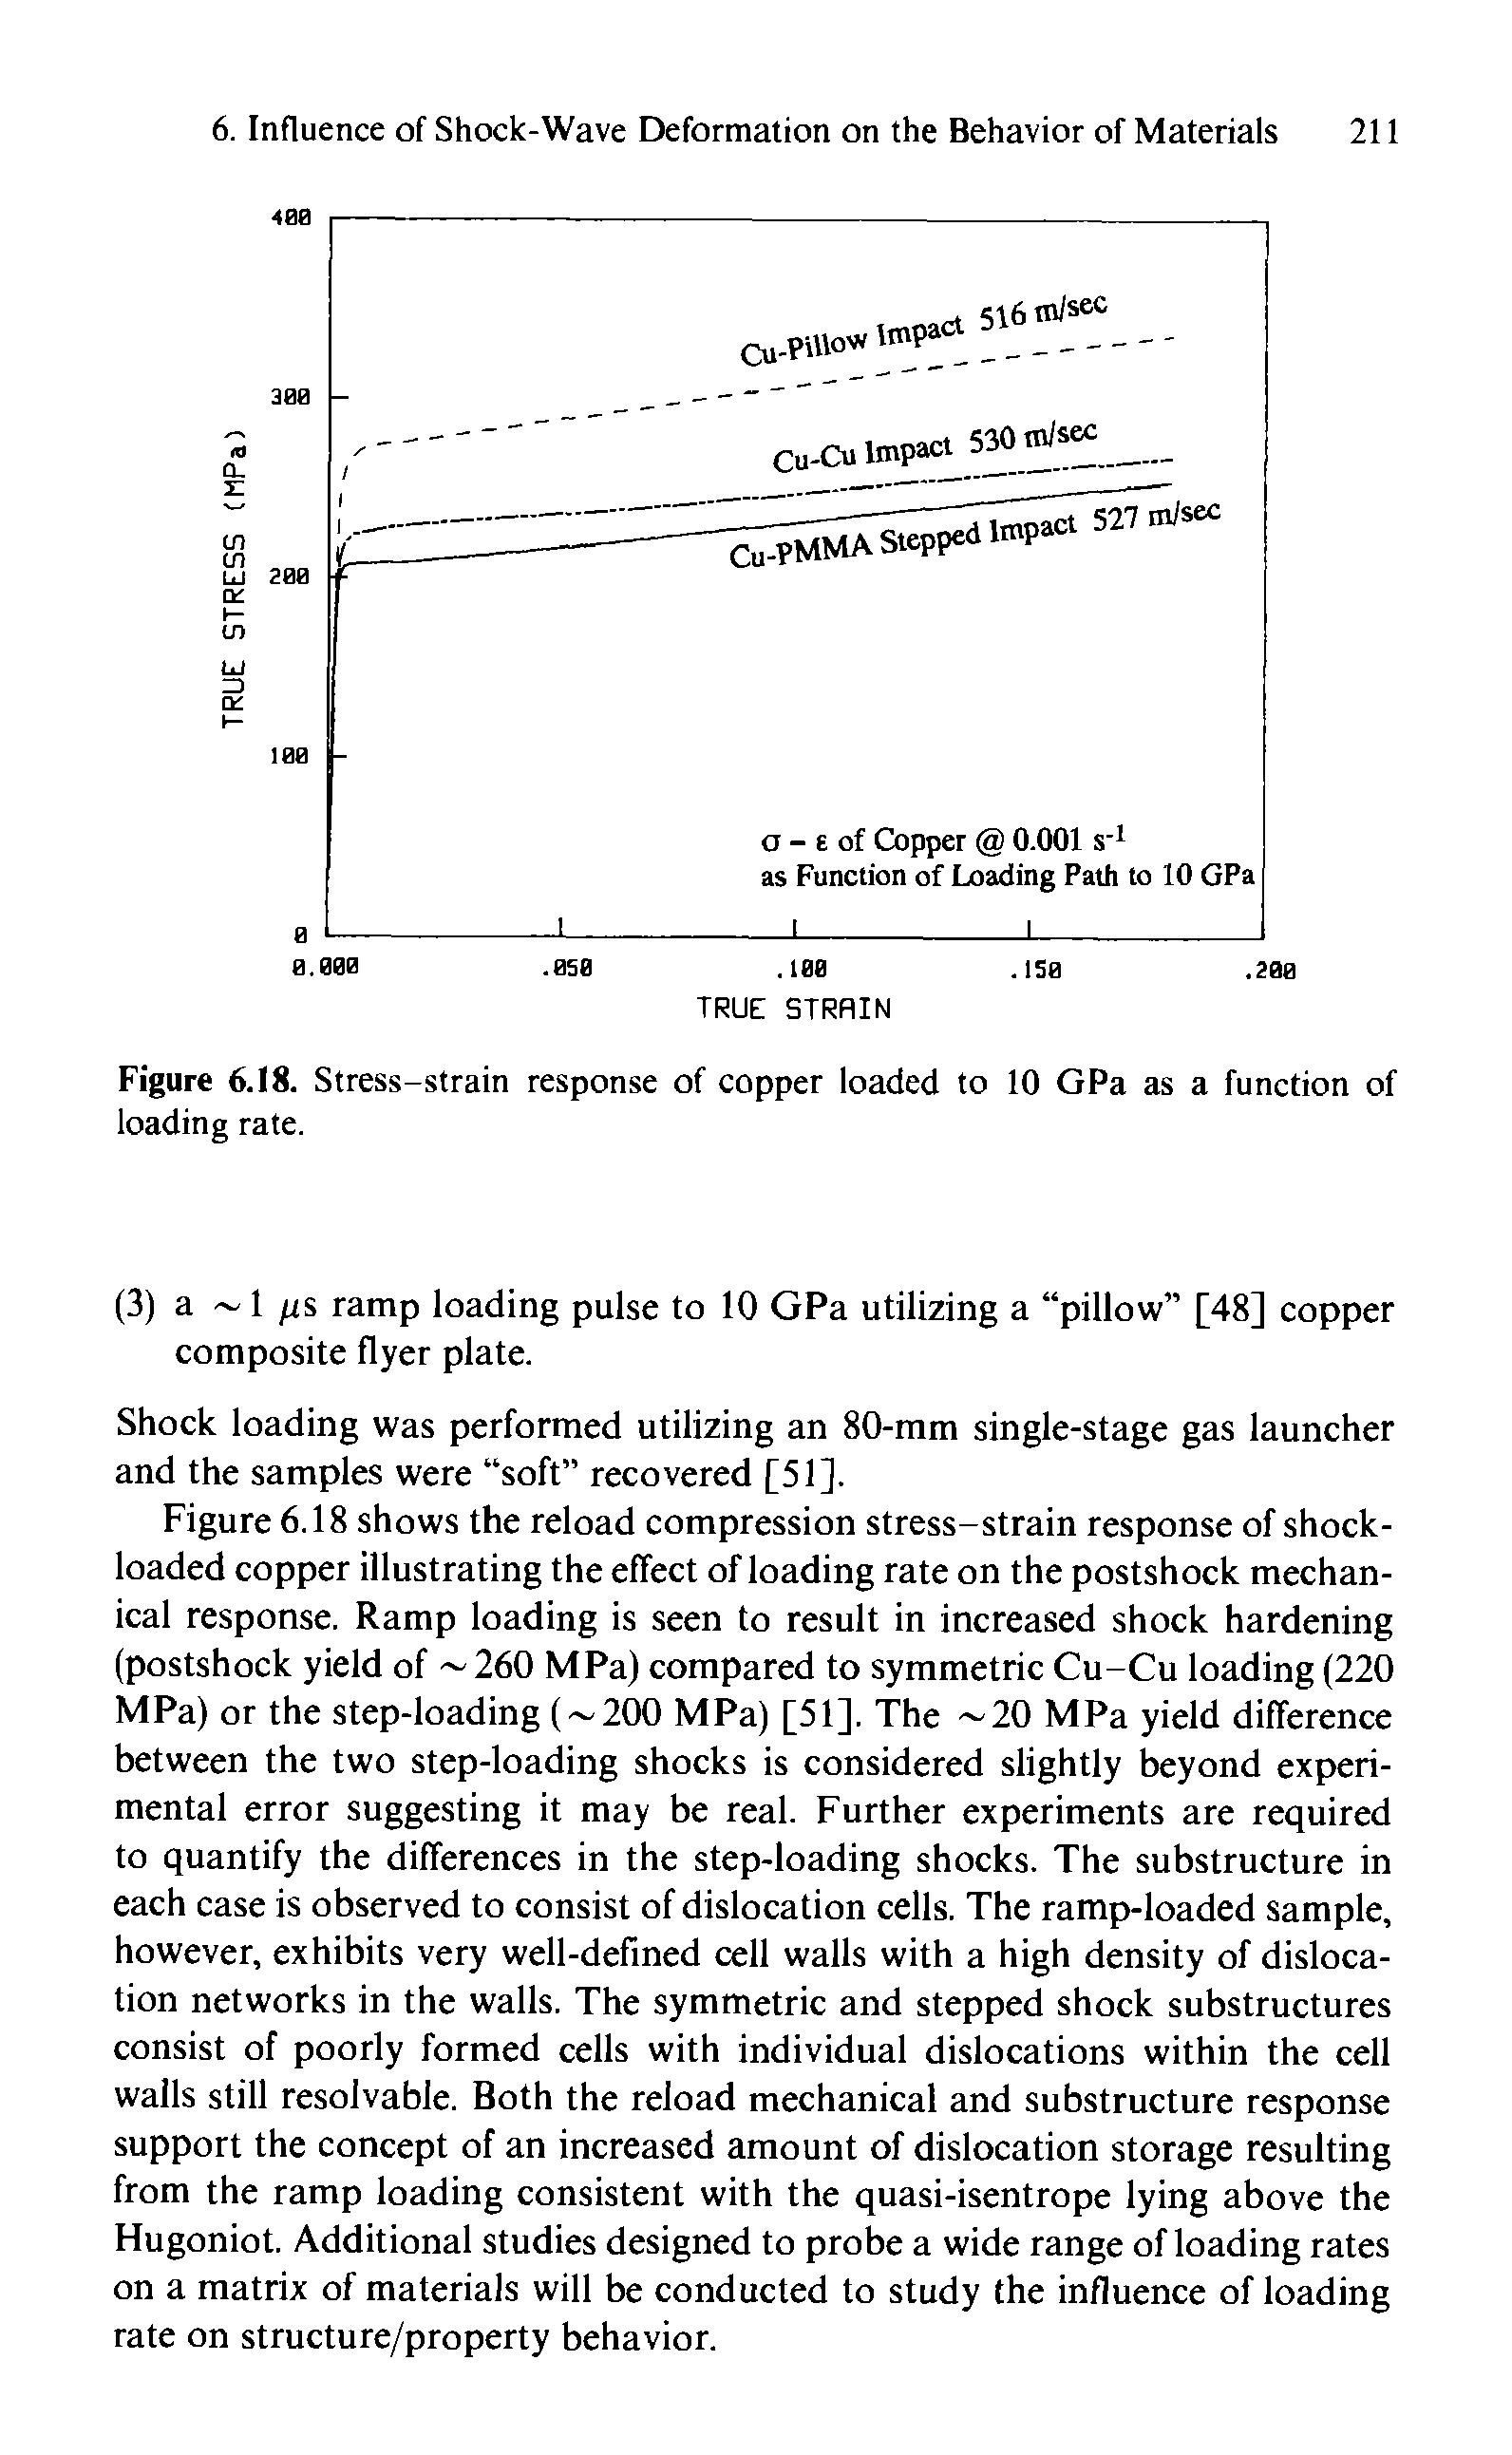 Figure 6.18. Stress-strain response of copper loaded to 10 GPa as a function of loading rate.